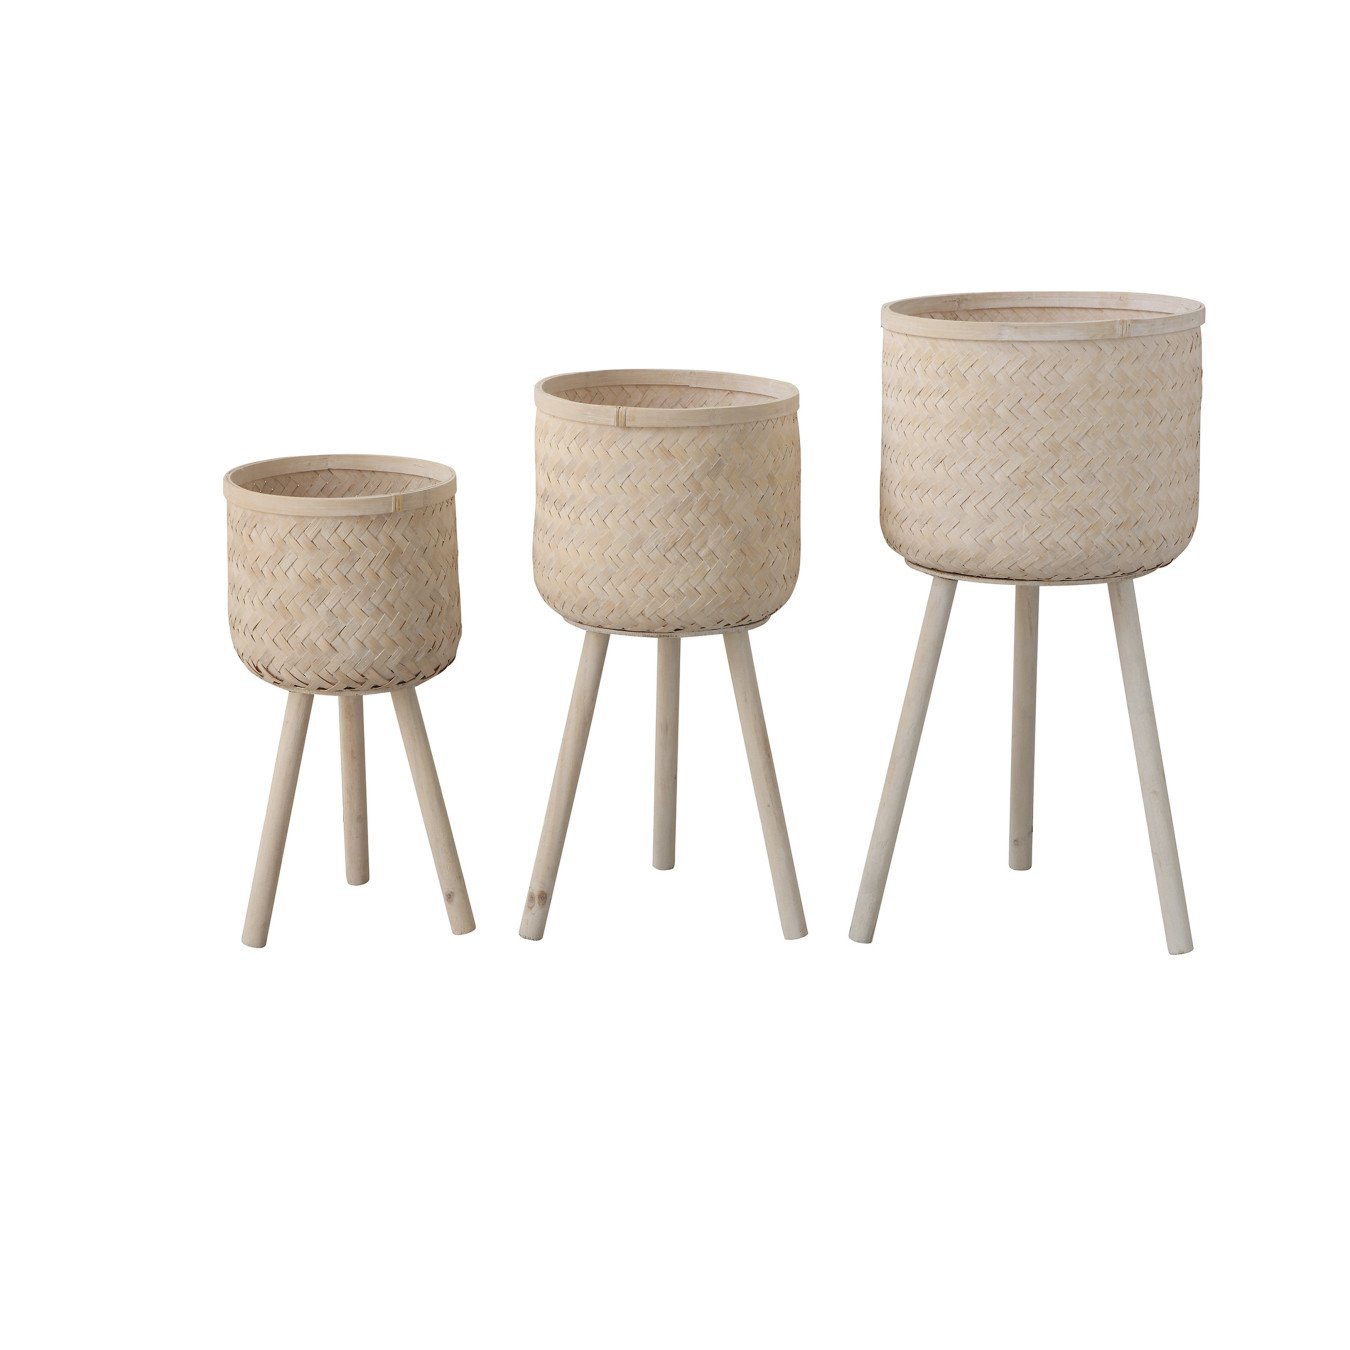 Set of 3 Round Bamboo Floor Baskets with Wood Legs